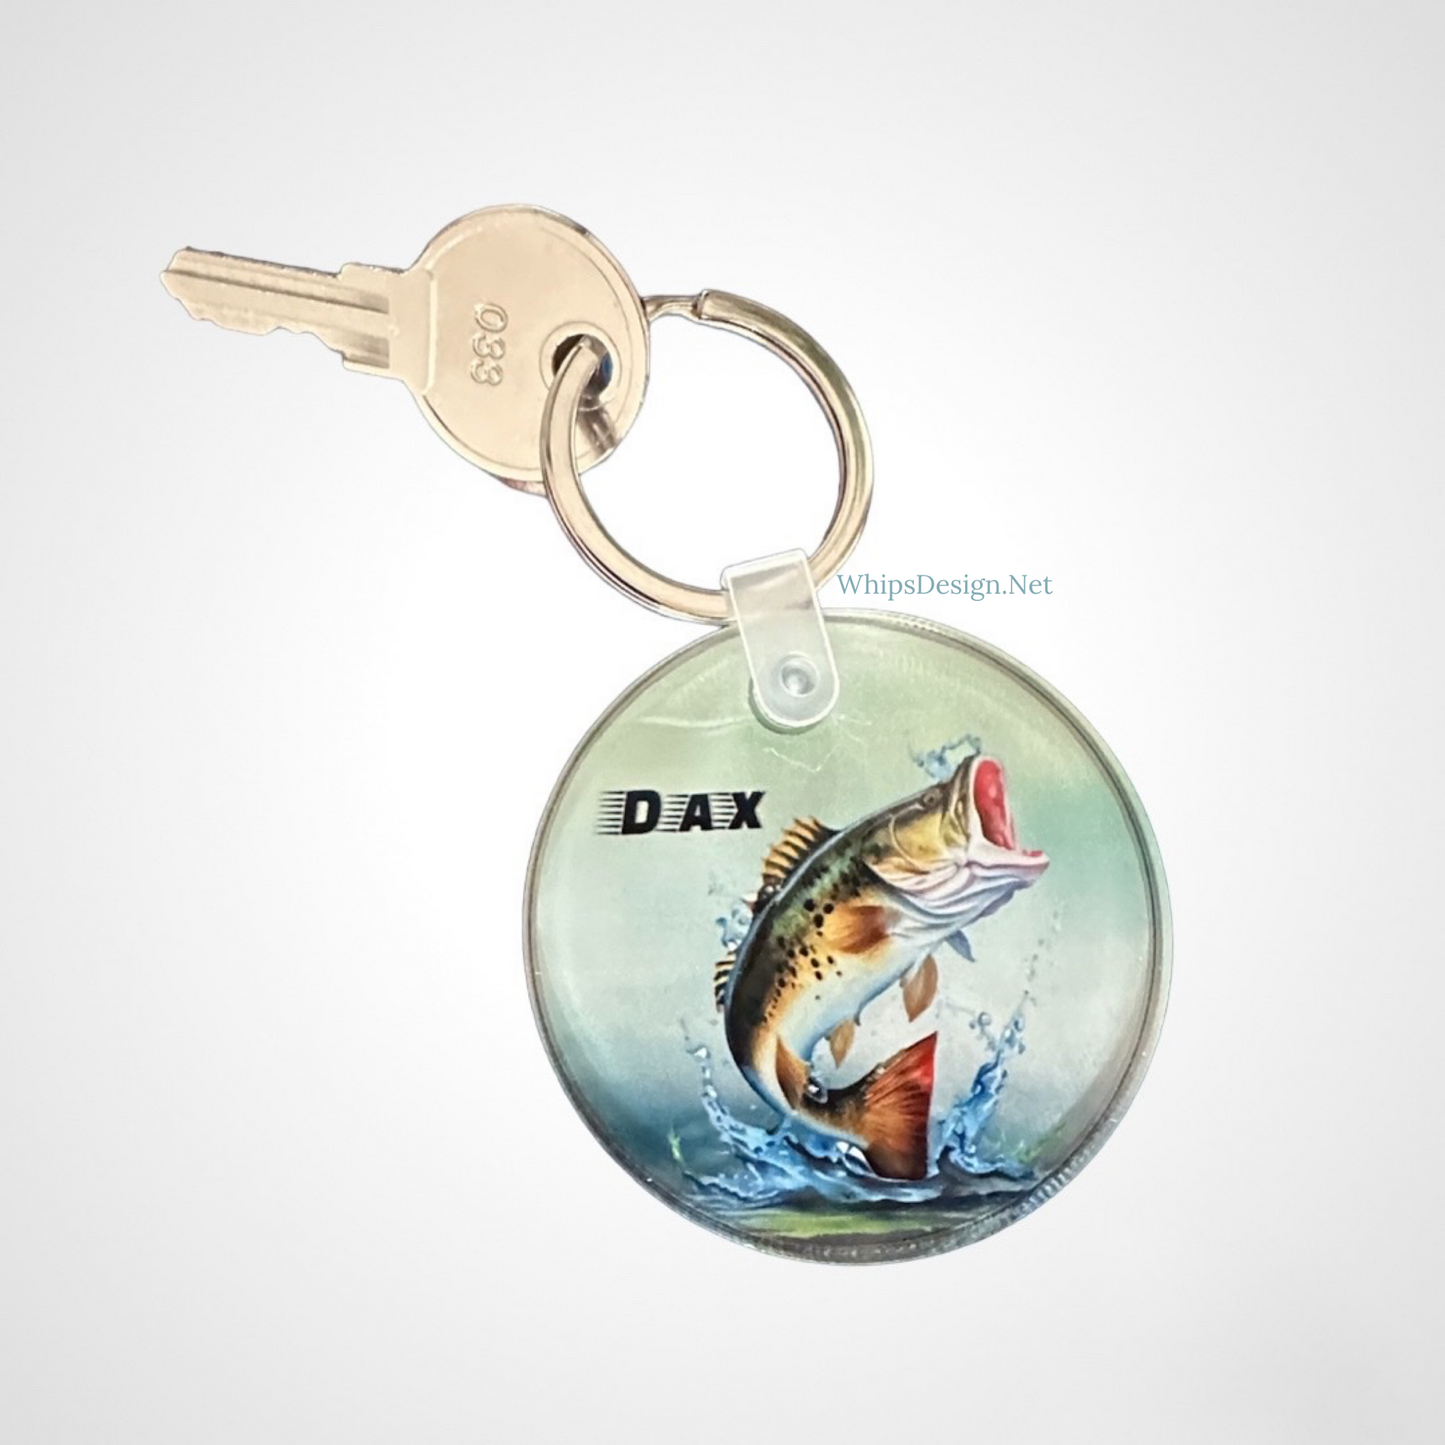 Bass Fish Keychain, Bass Fishing Gift, Unique Camping Gift, RV